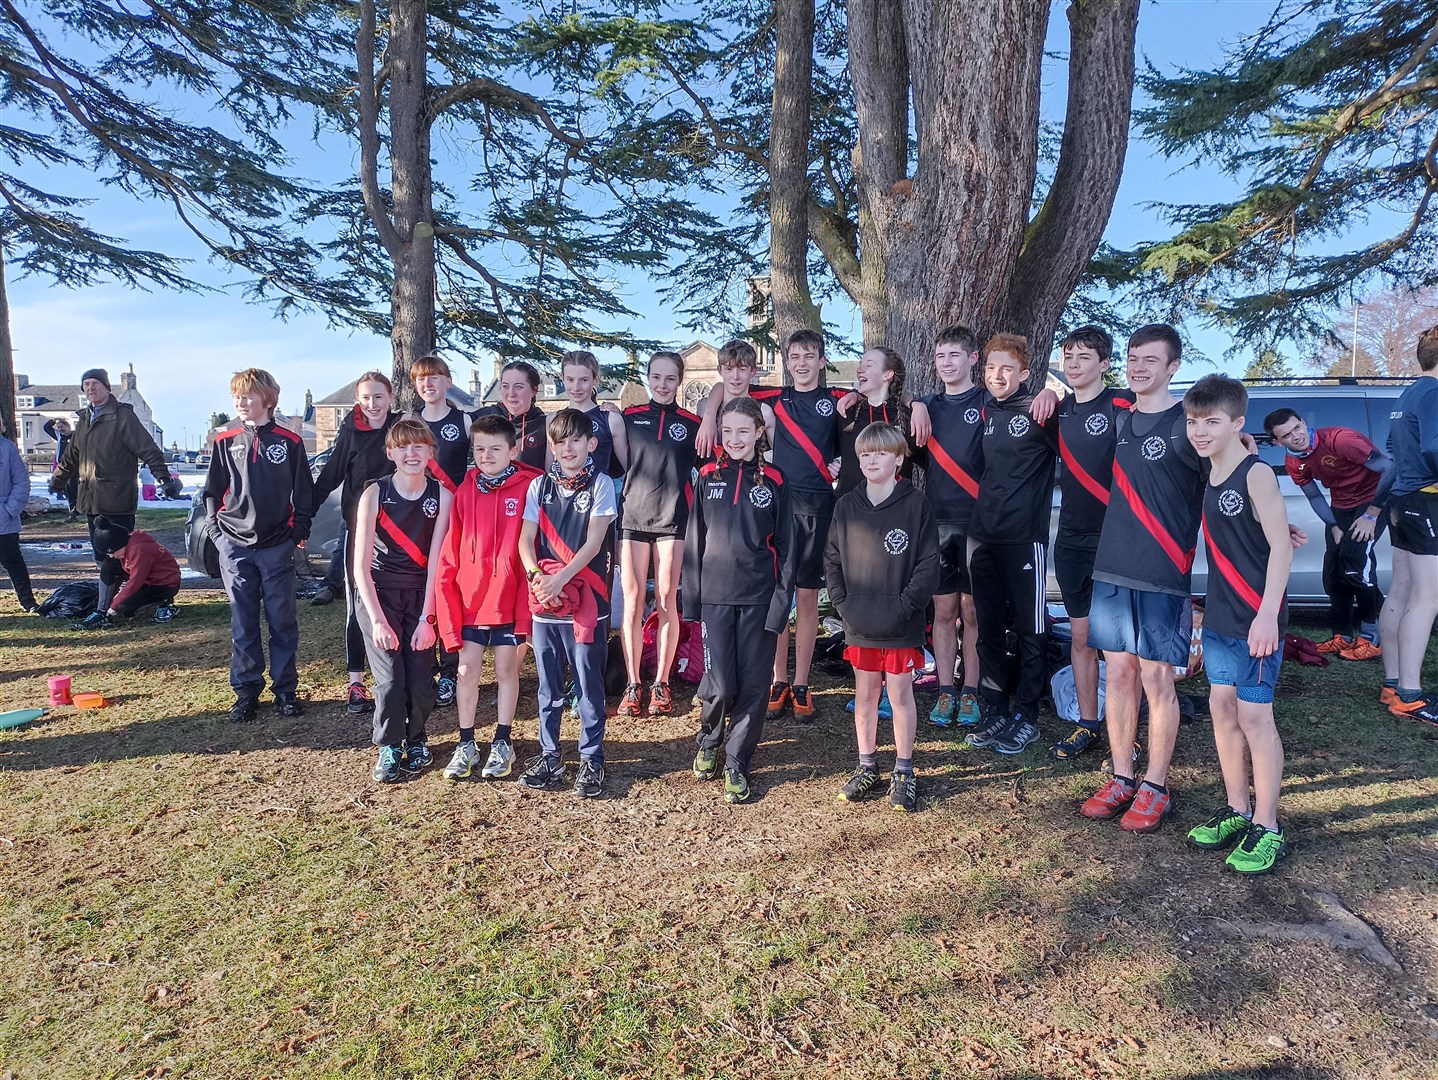 The full Ross County Athletics Club squad that raced at the final fixture of the season in Forres.